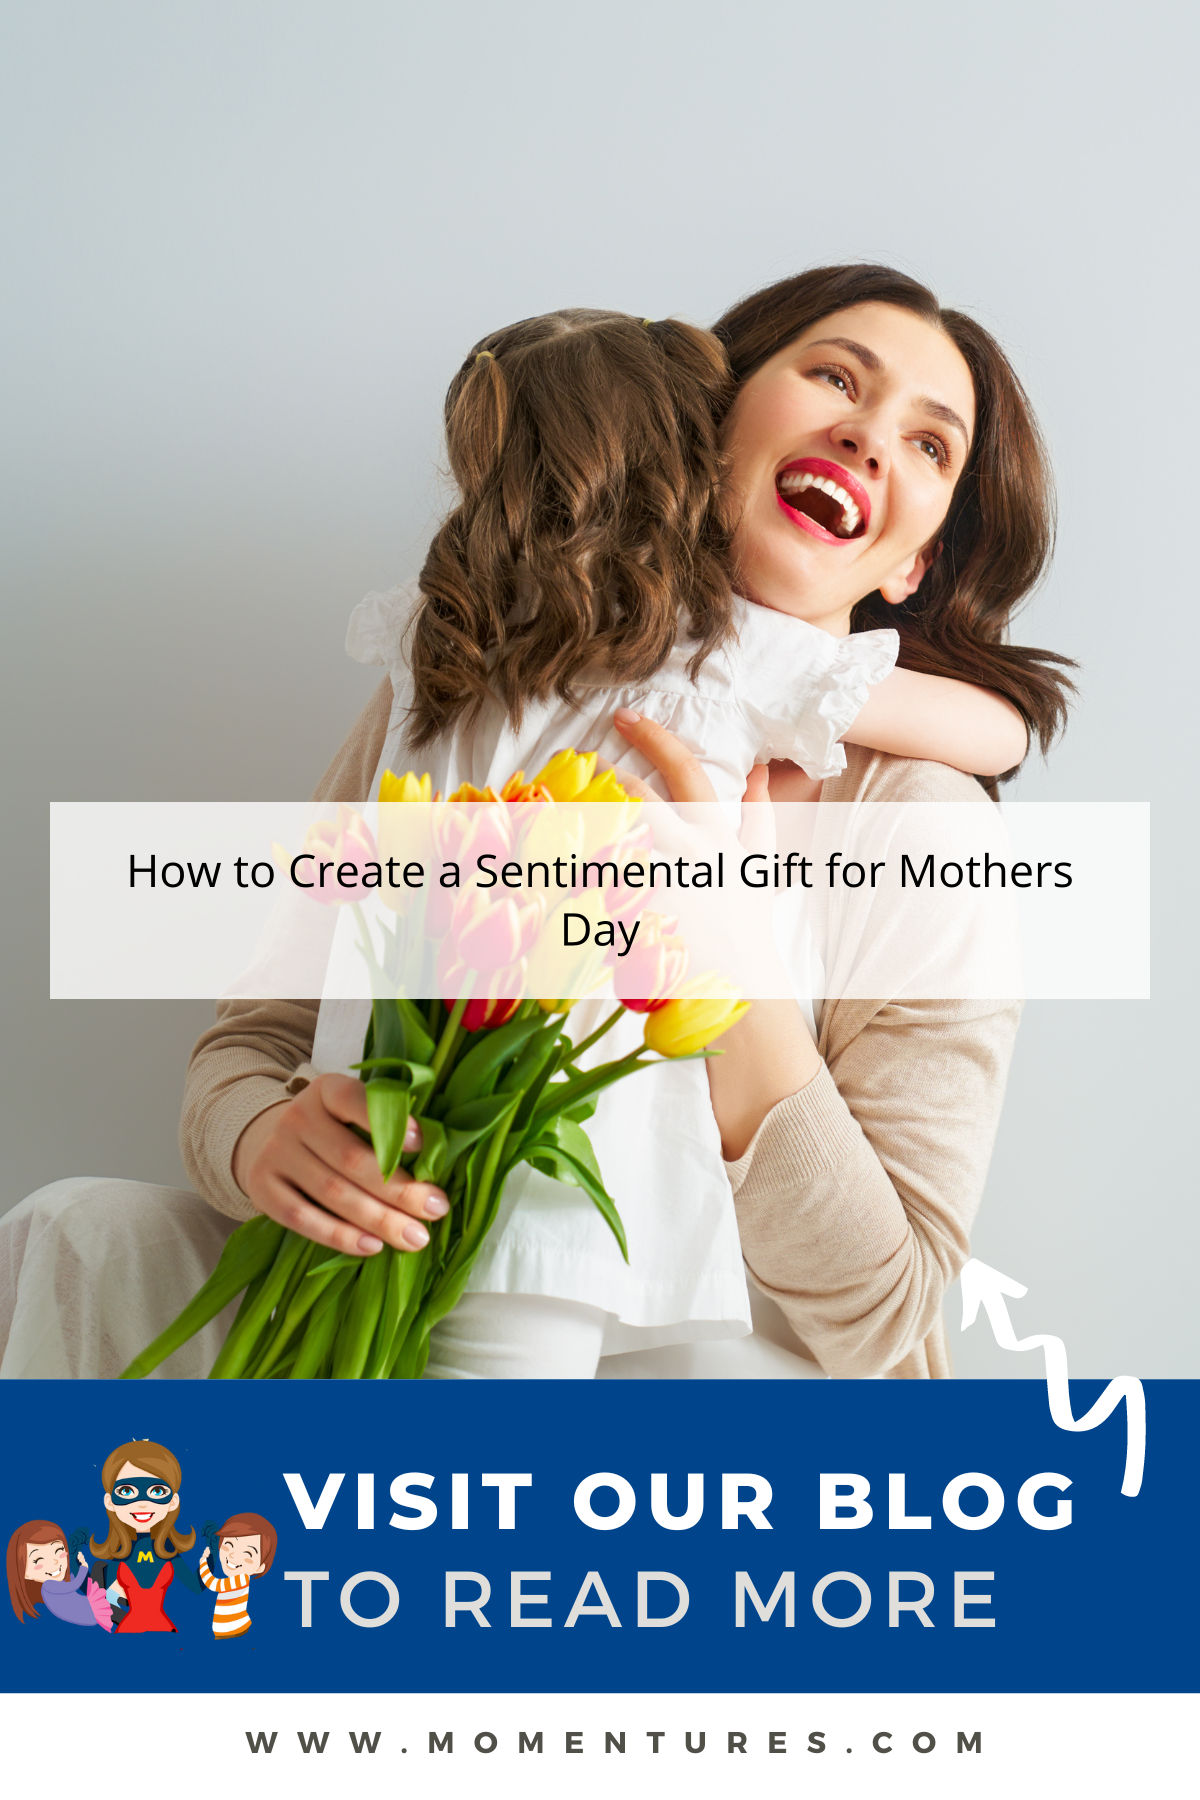 How to Create a Sentimental Gift for Mothers Day